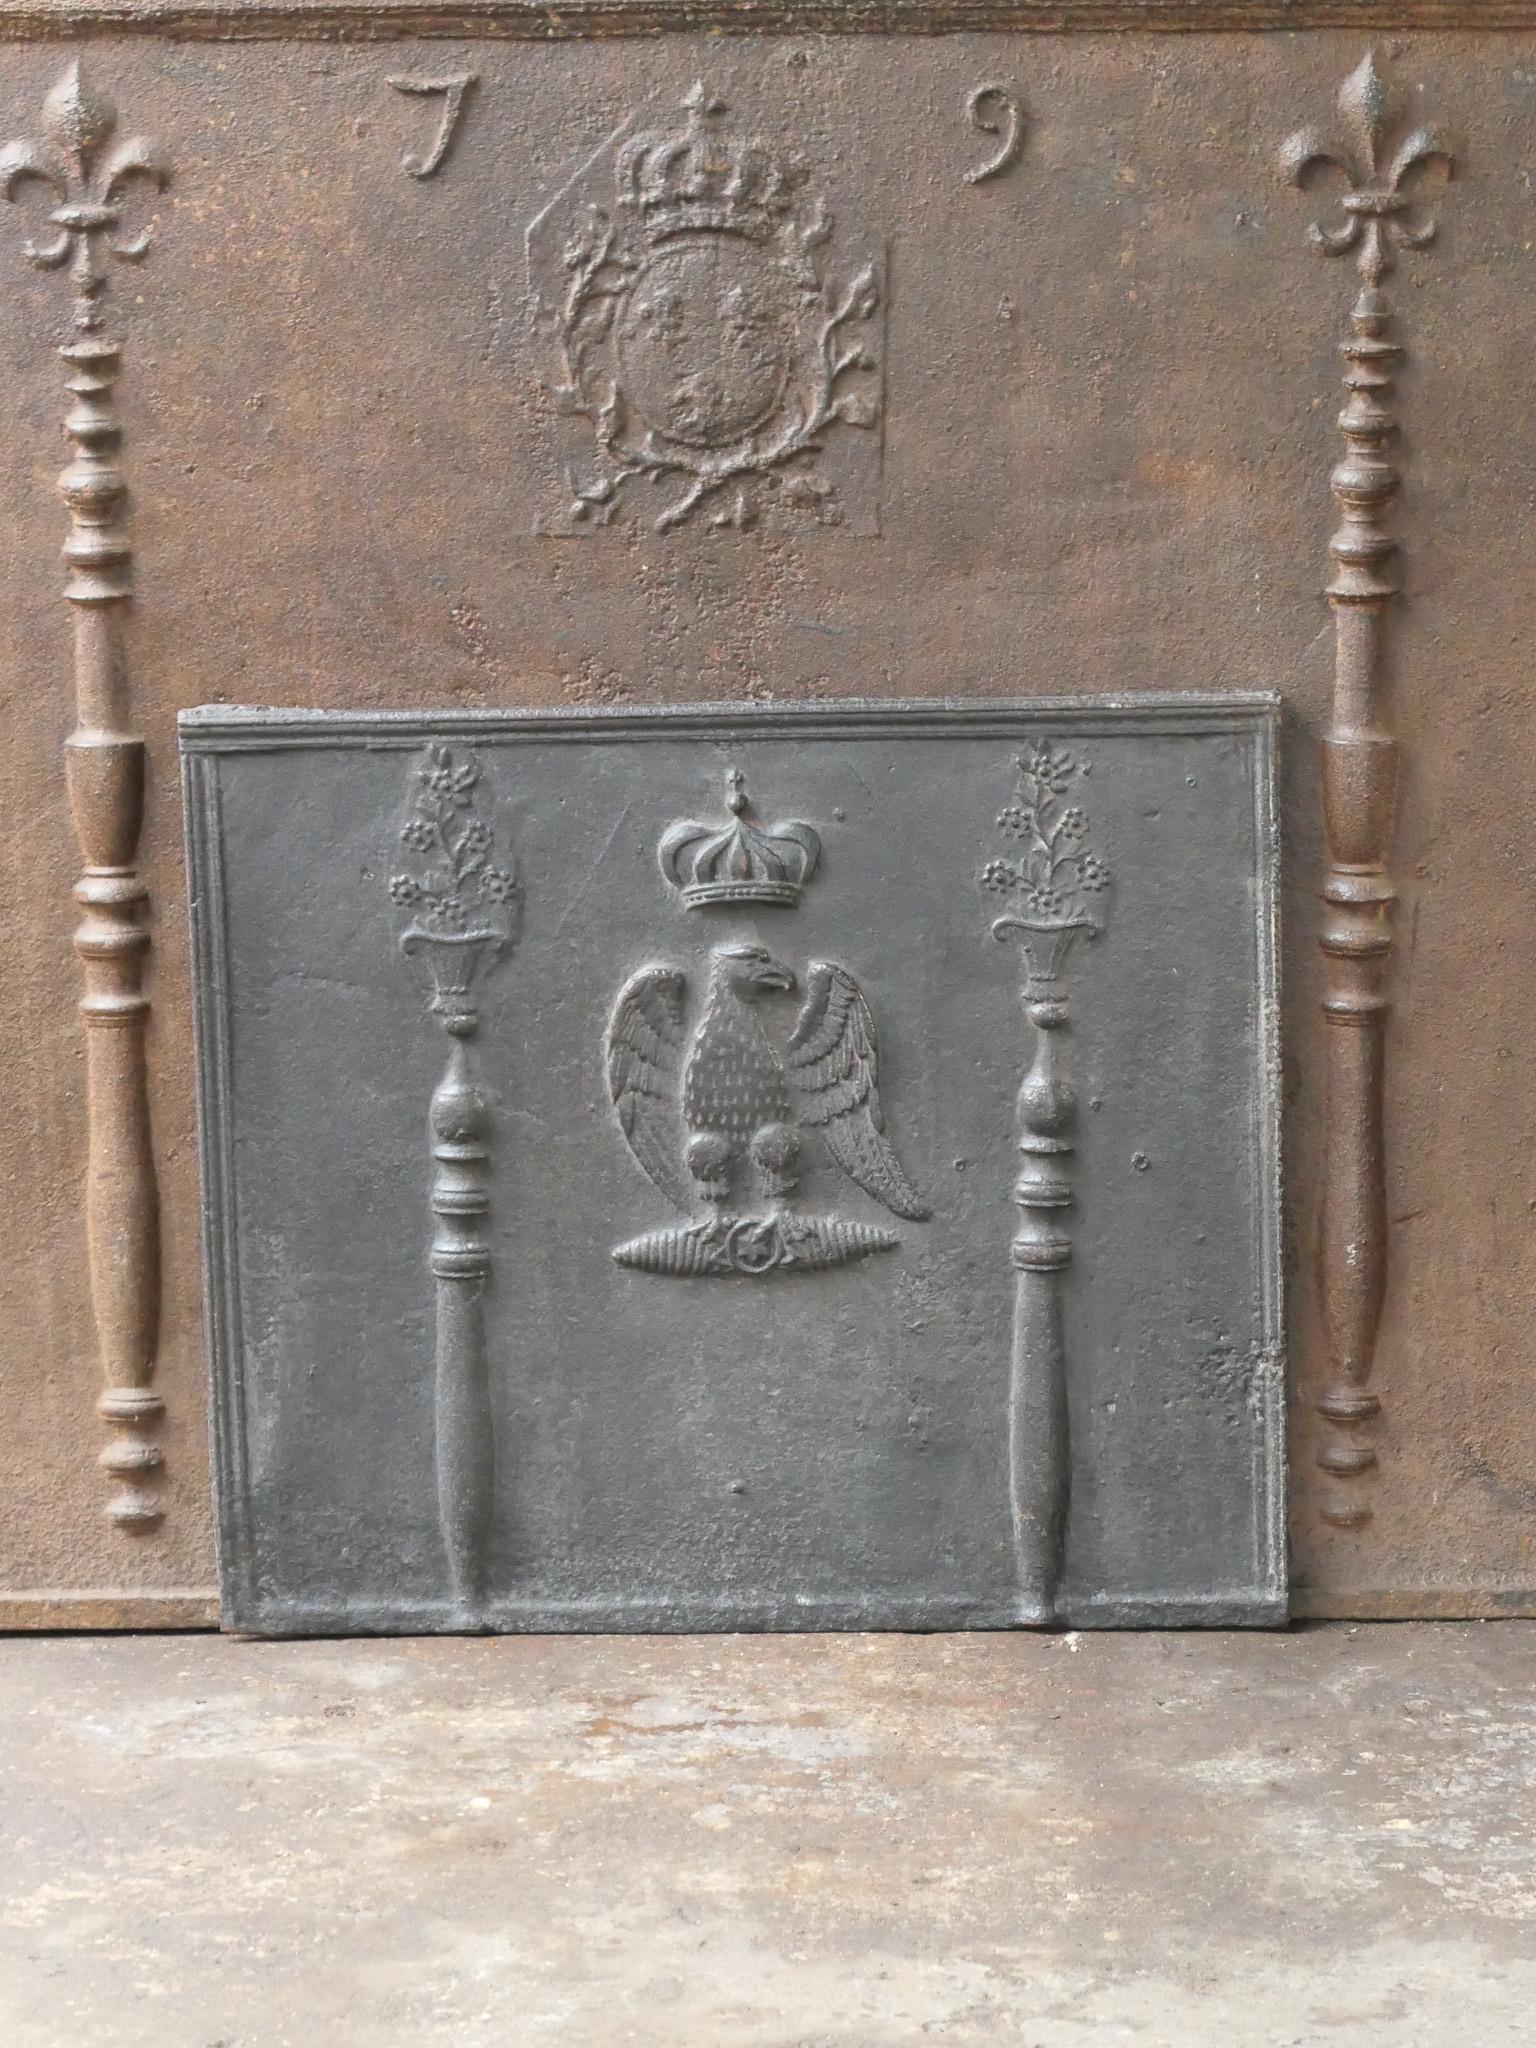 18th-19th century French fireback with two eagles, coat of arms of Napoleon Bonaparte. The style of the fireback is Neoclassical and it is from that period.

The fireback is made of cast iron and has a black patina. The fireback is in a good